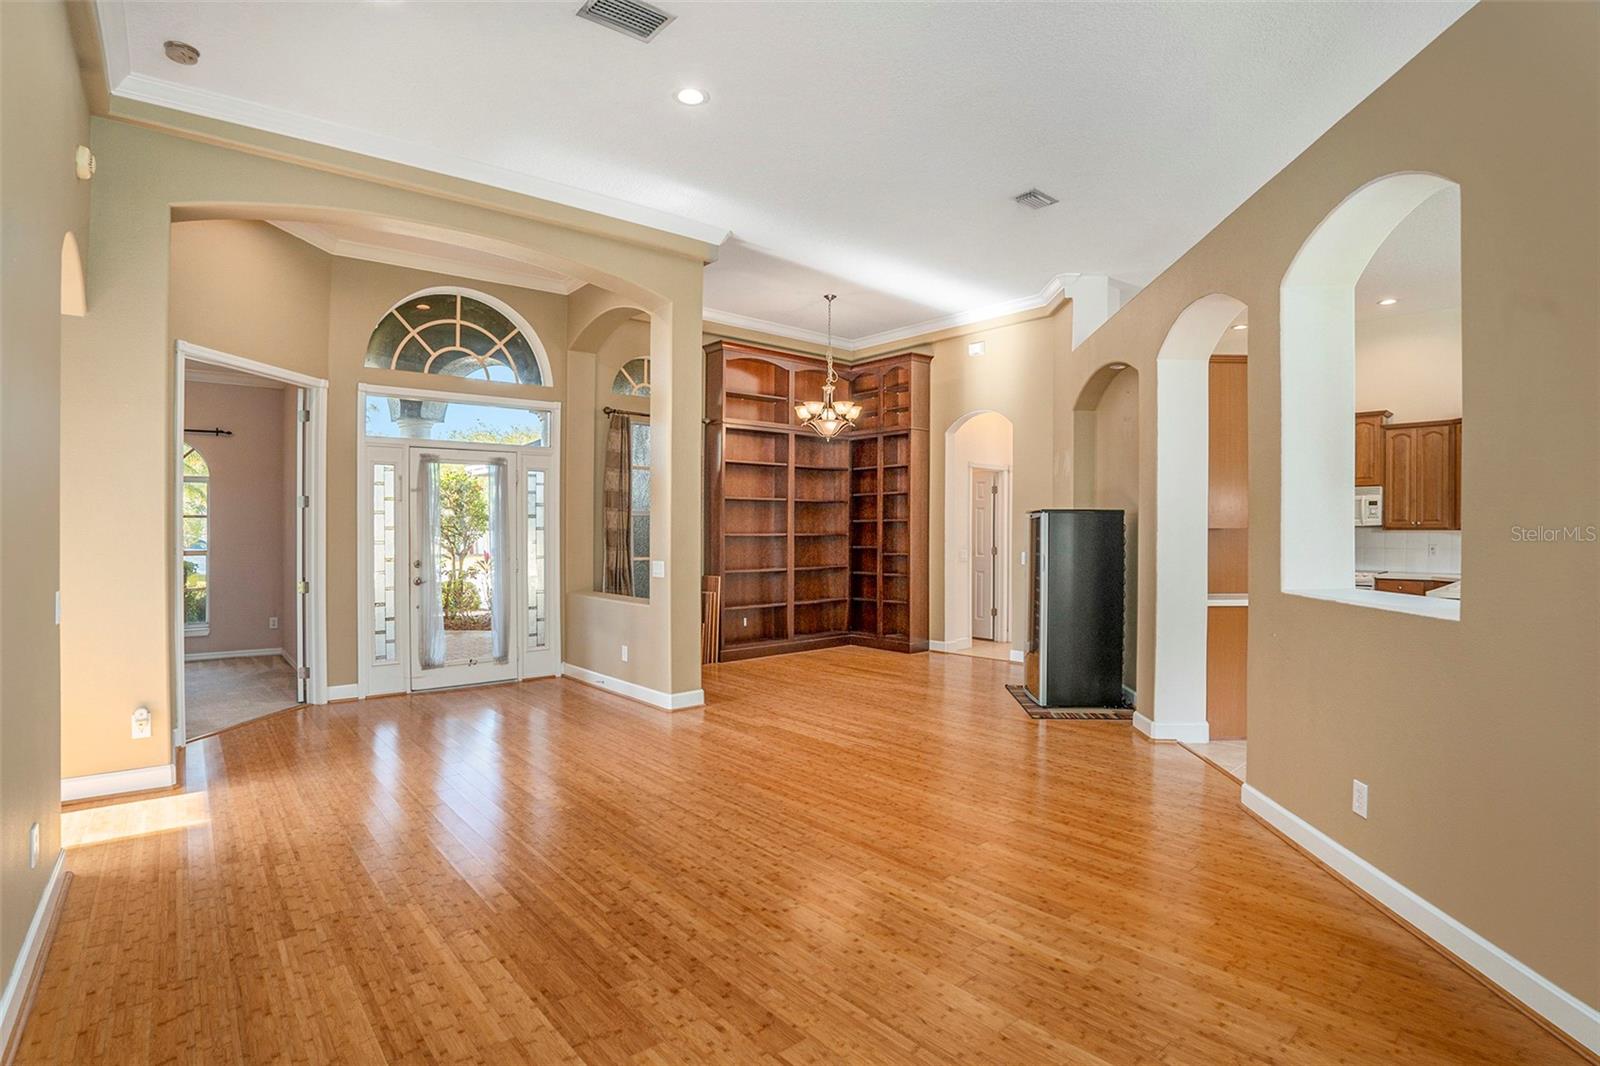 Built-in bookshelves. The open space is adorned with archways, columns, and crown molding.